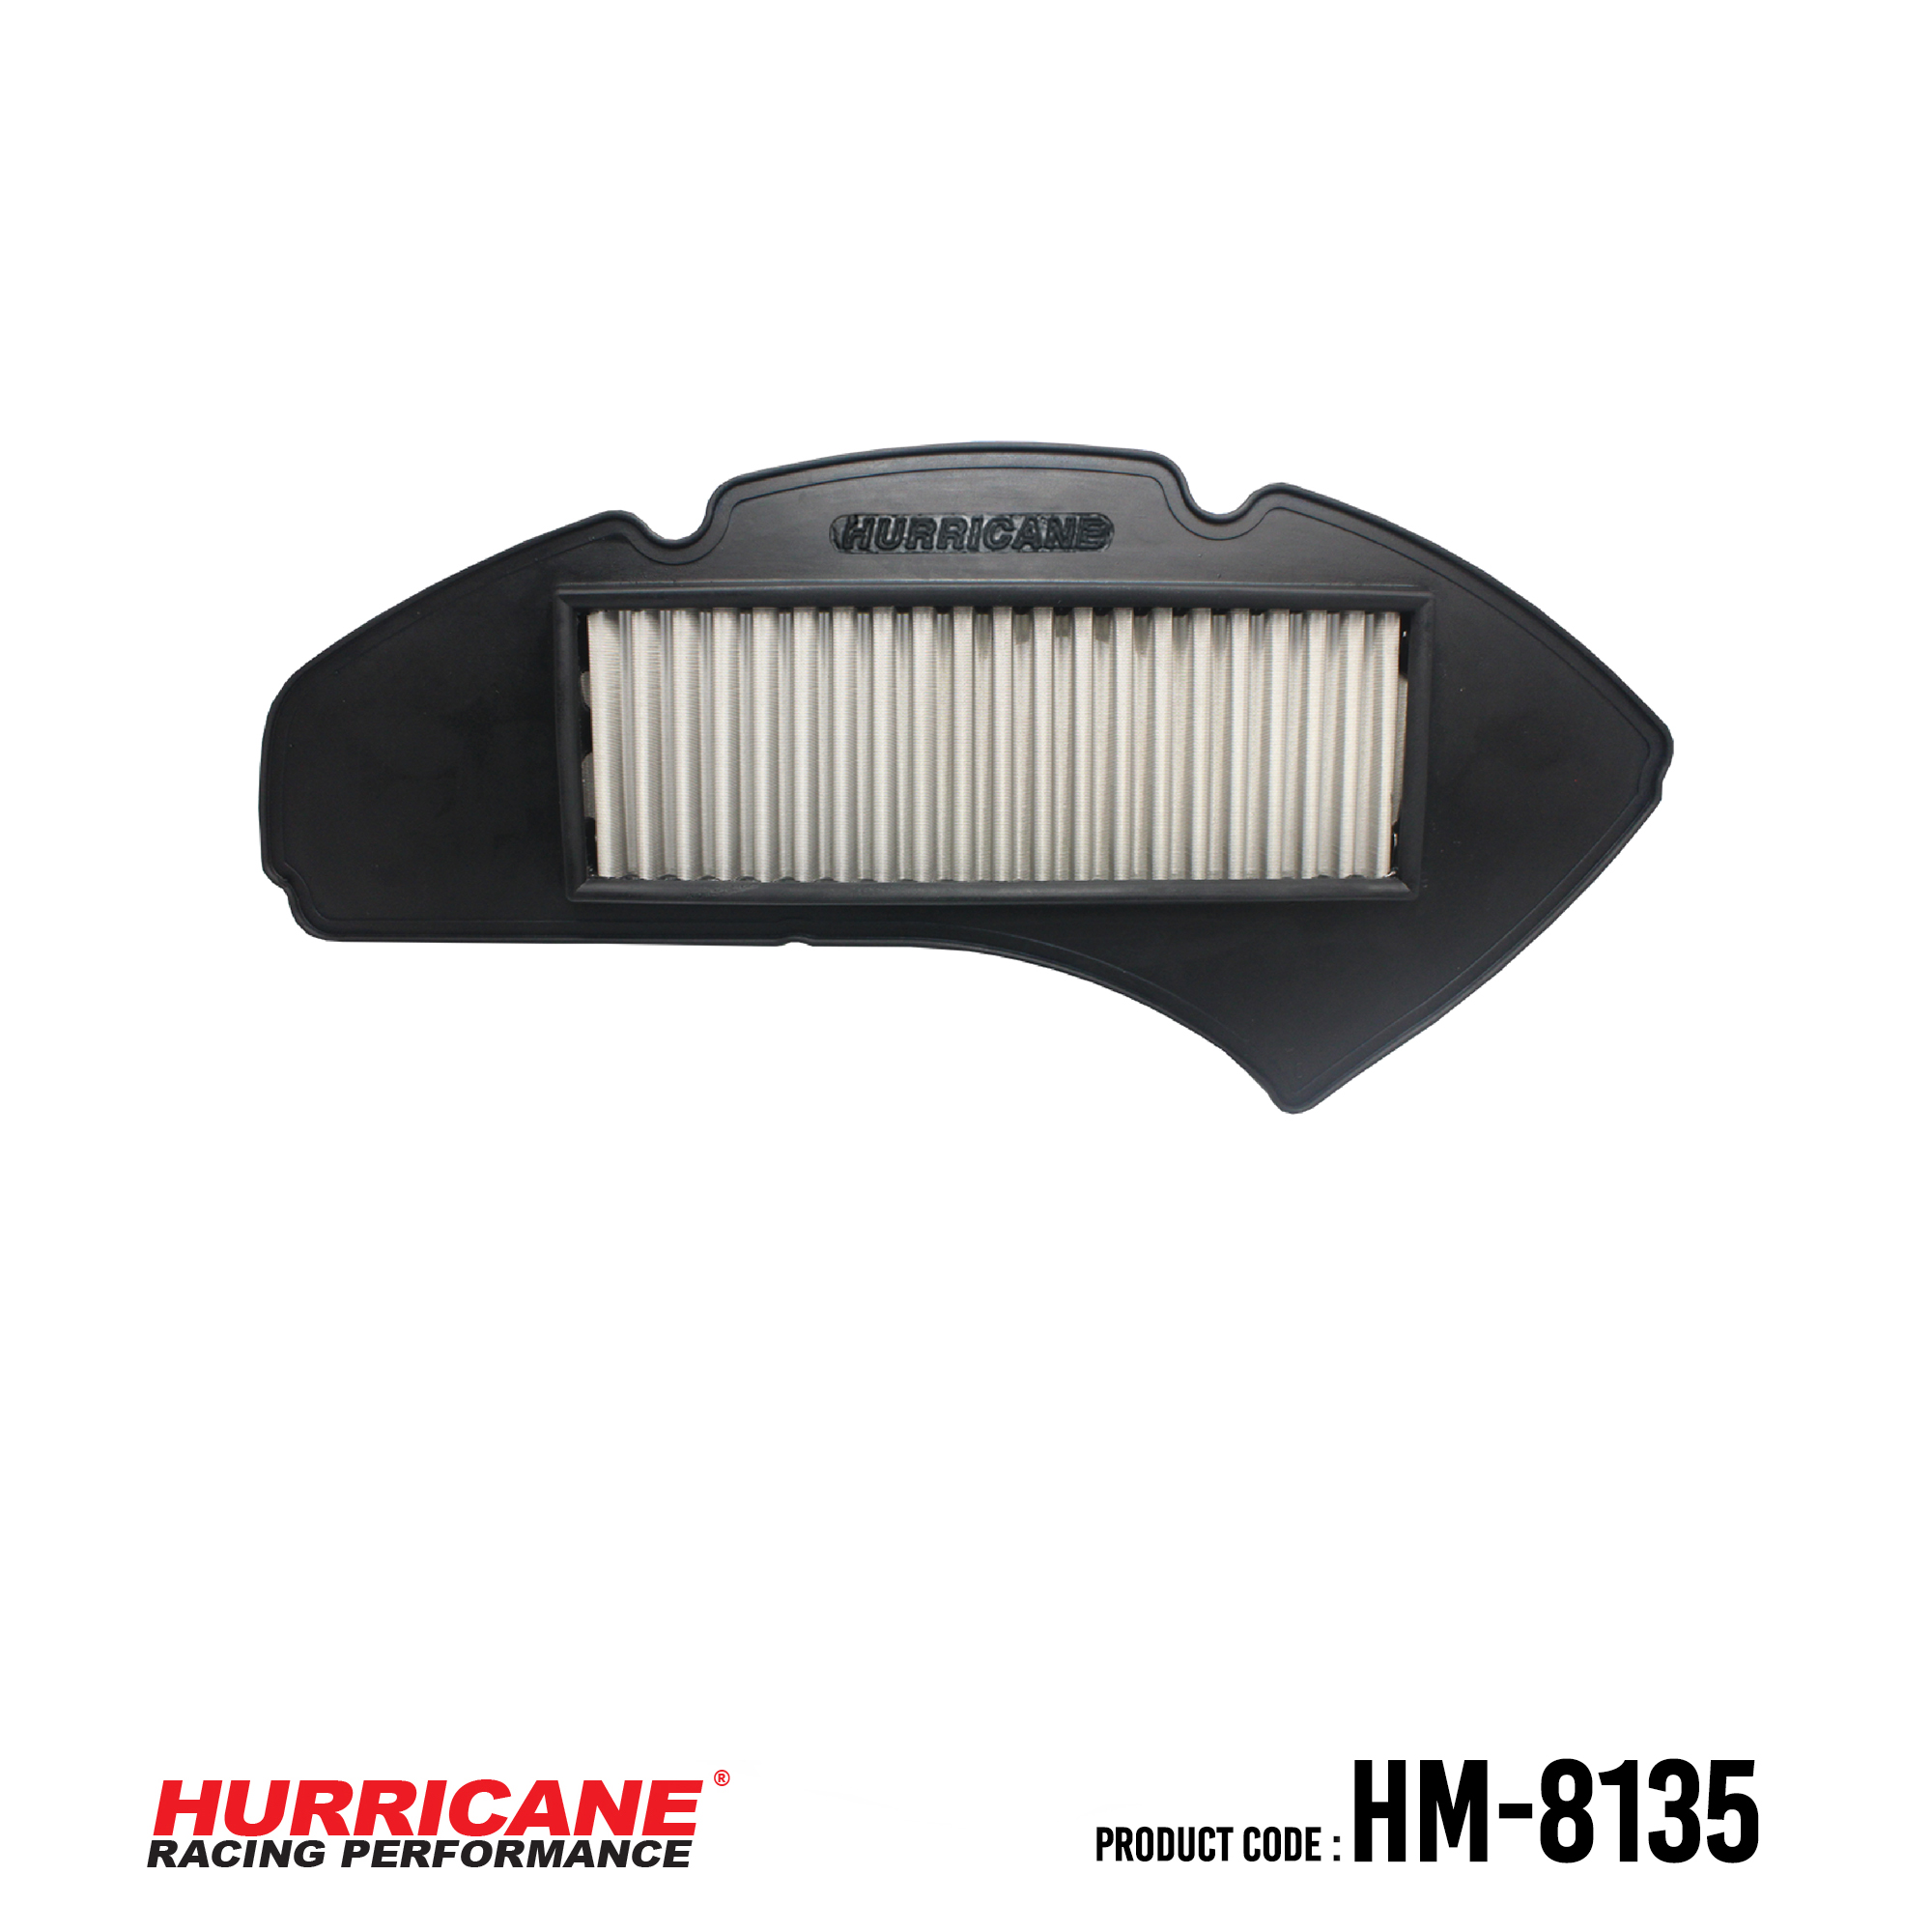 HURRICANE STAINLESS STEEL AIR FILTER FOR HM-8135 Yamaha